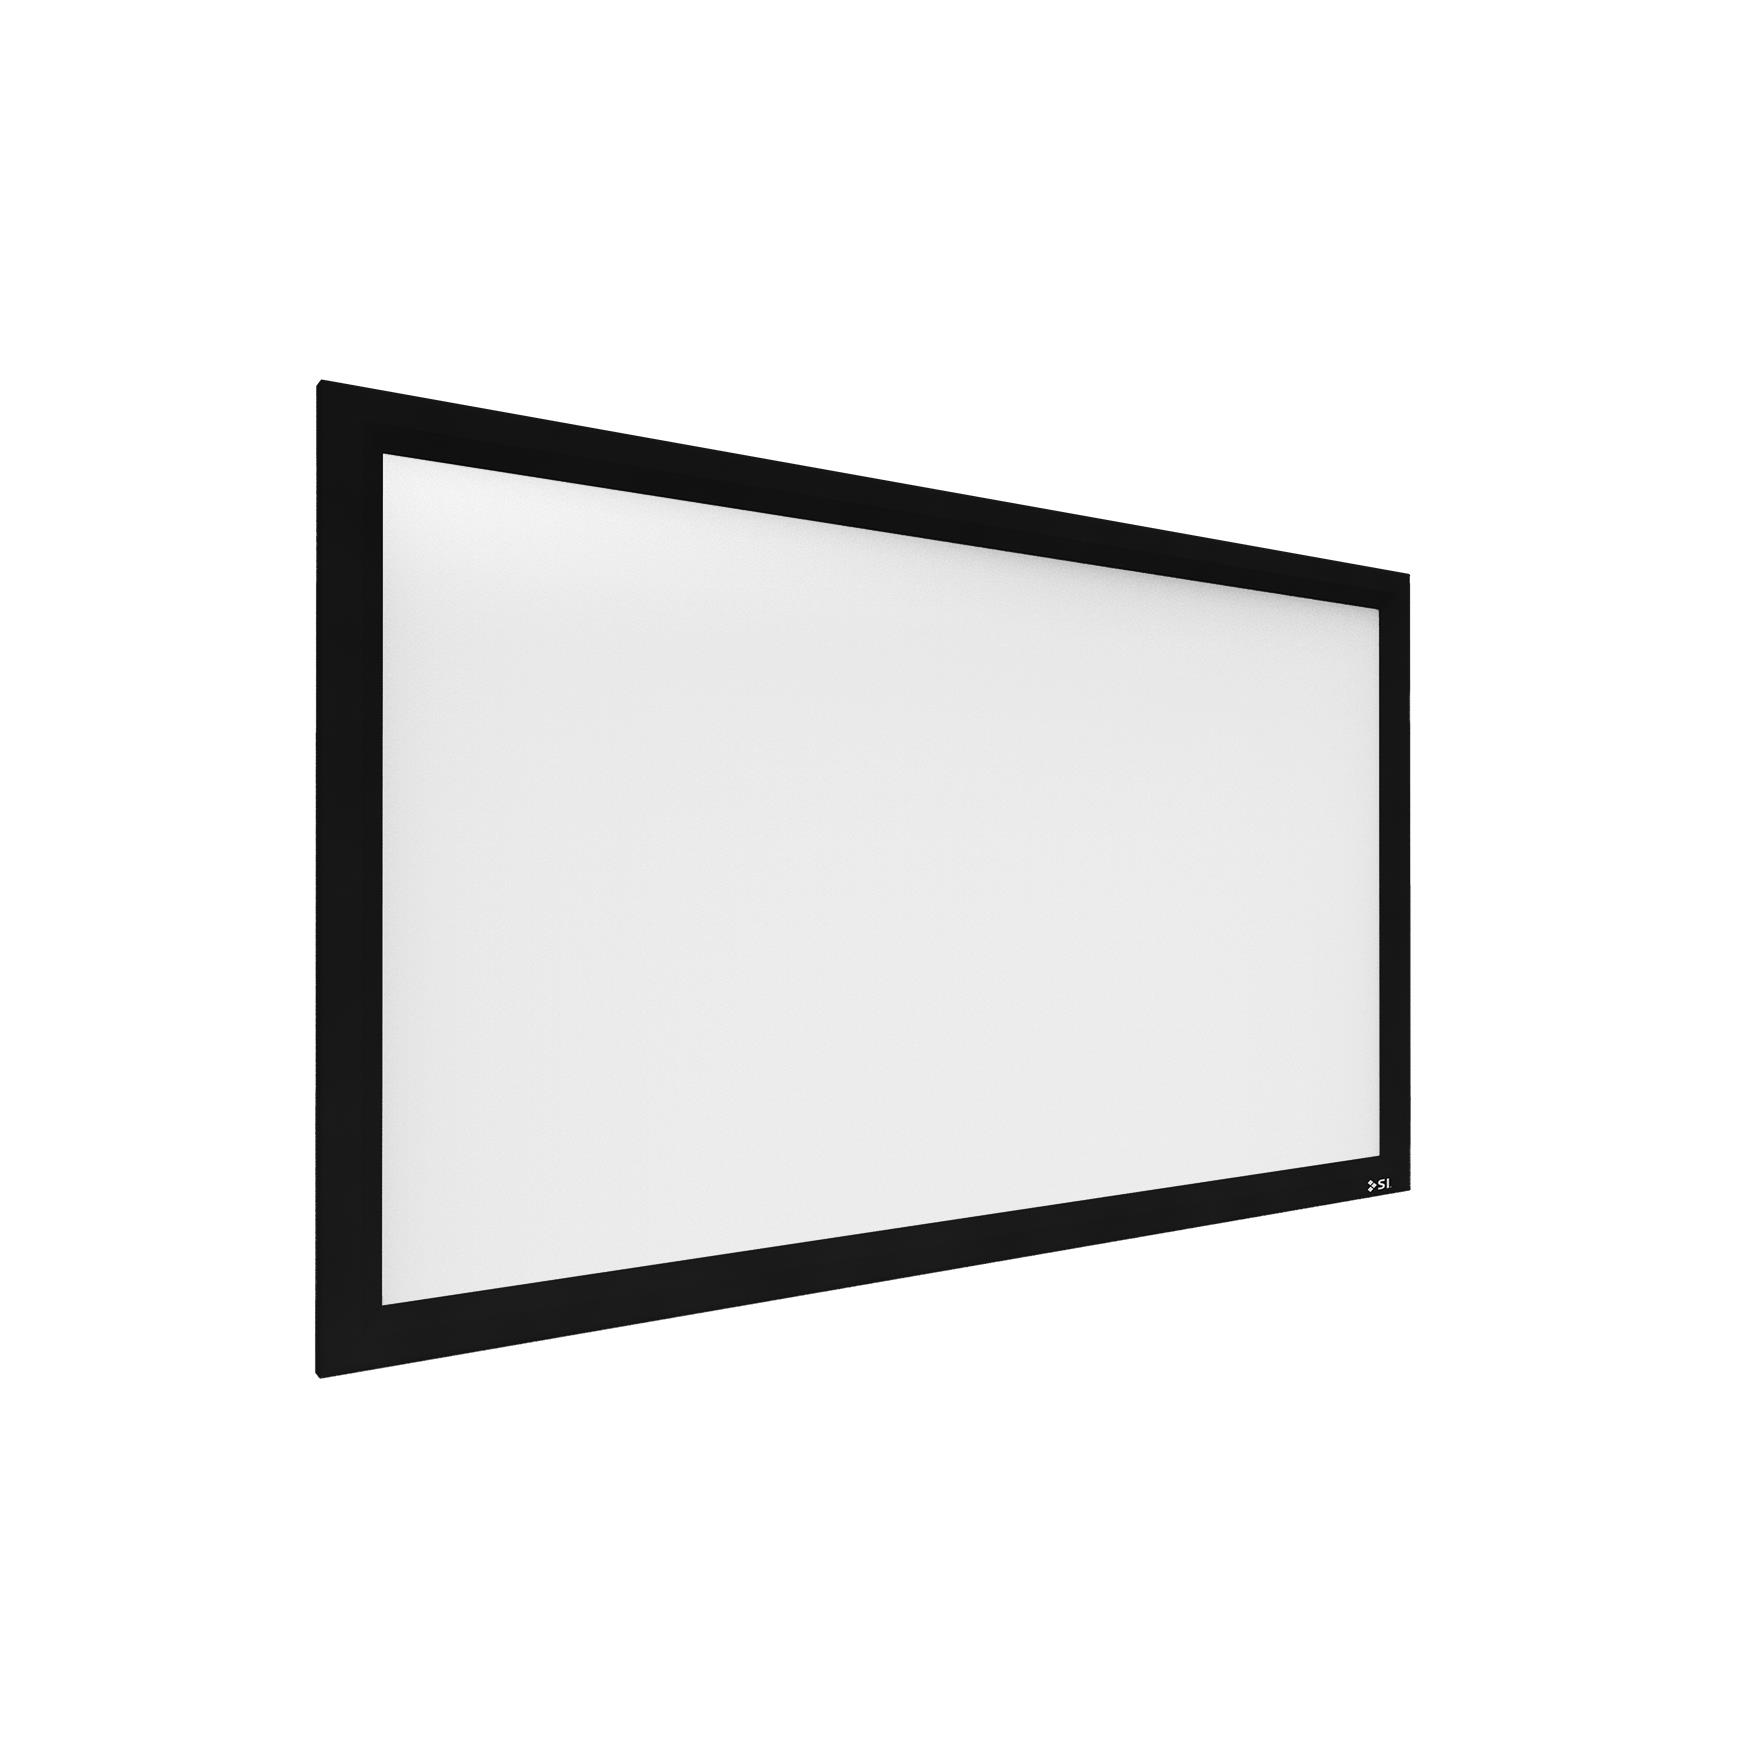 Screen Innovations 3 Series Fixed - 120